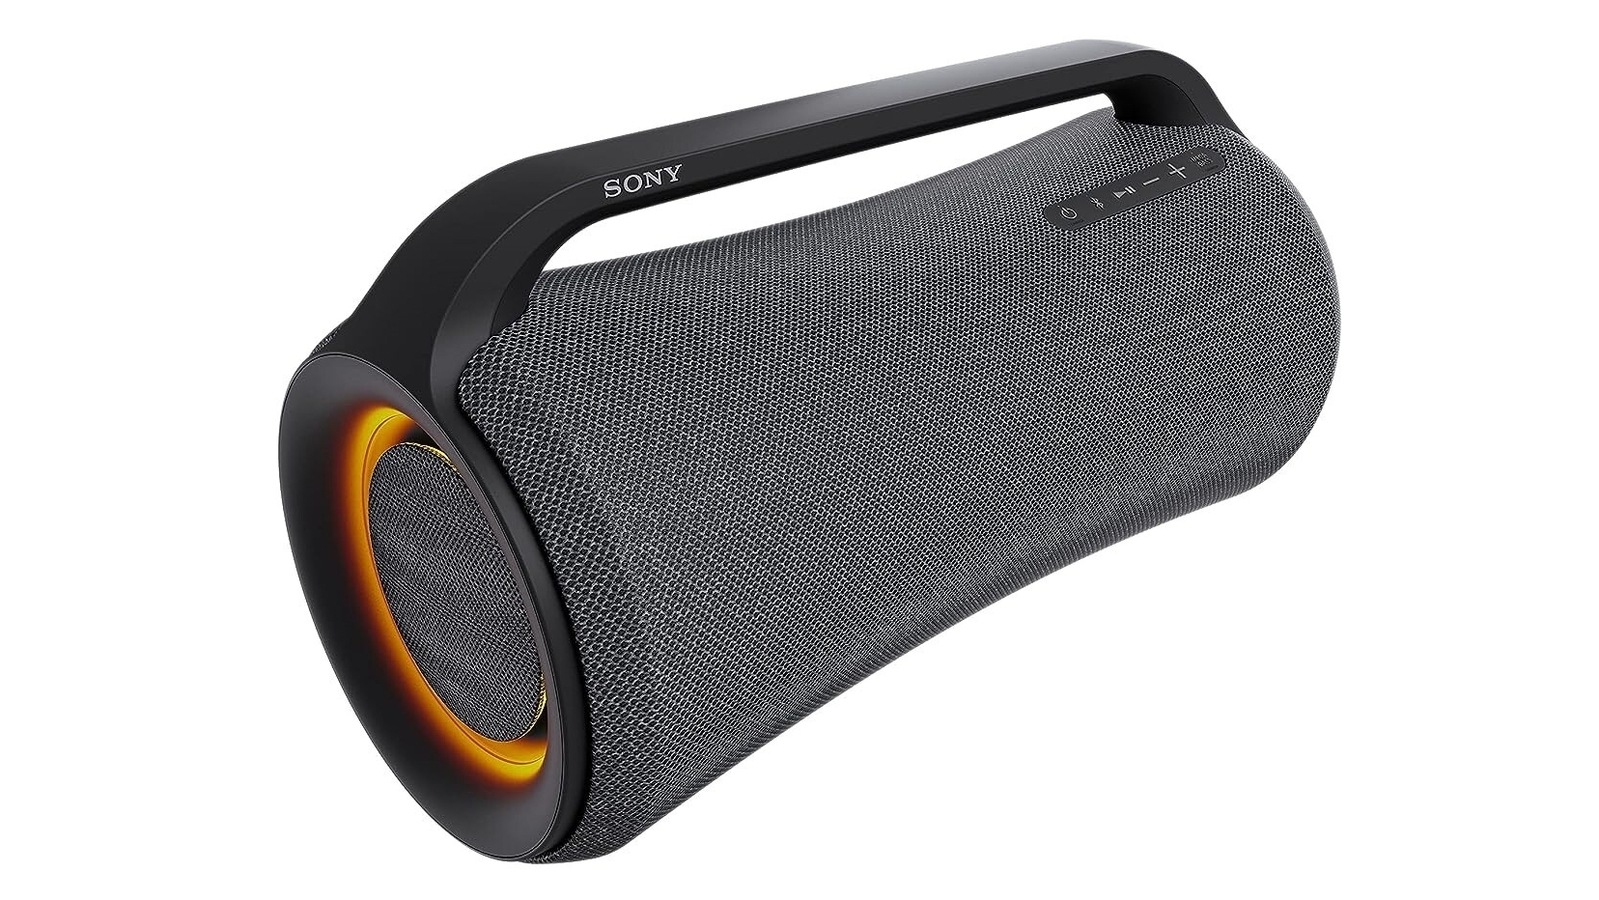 Top 8 Sony Bluetooth Shop for HT Now speakers audiophiles 